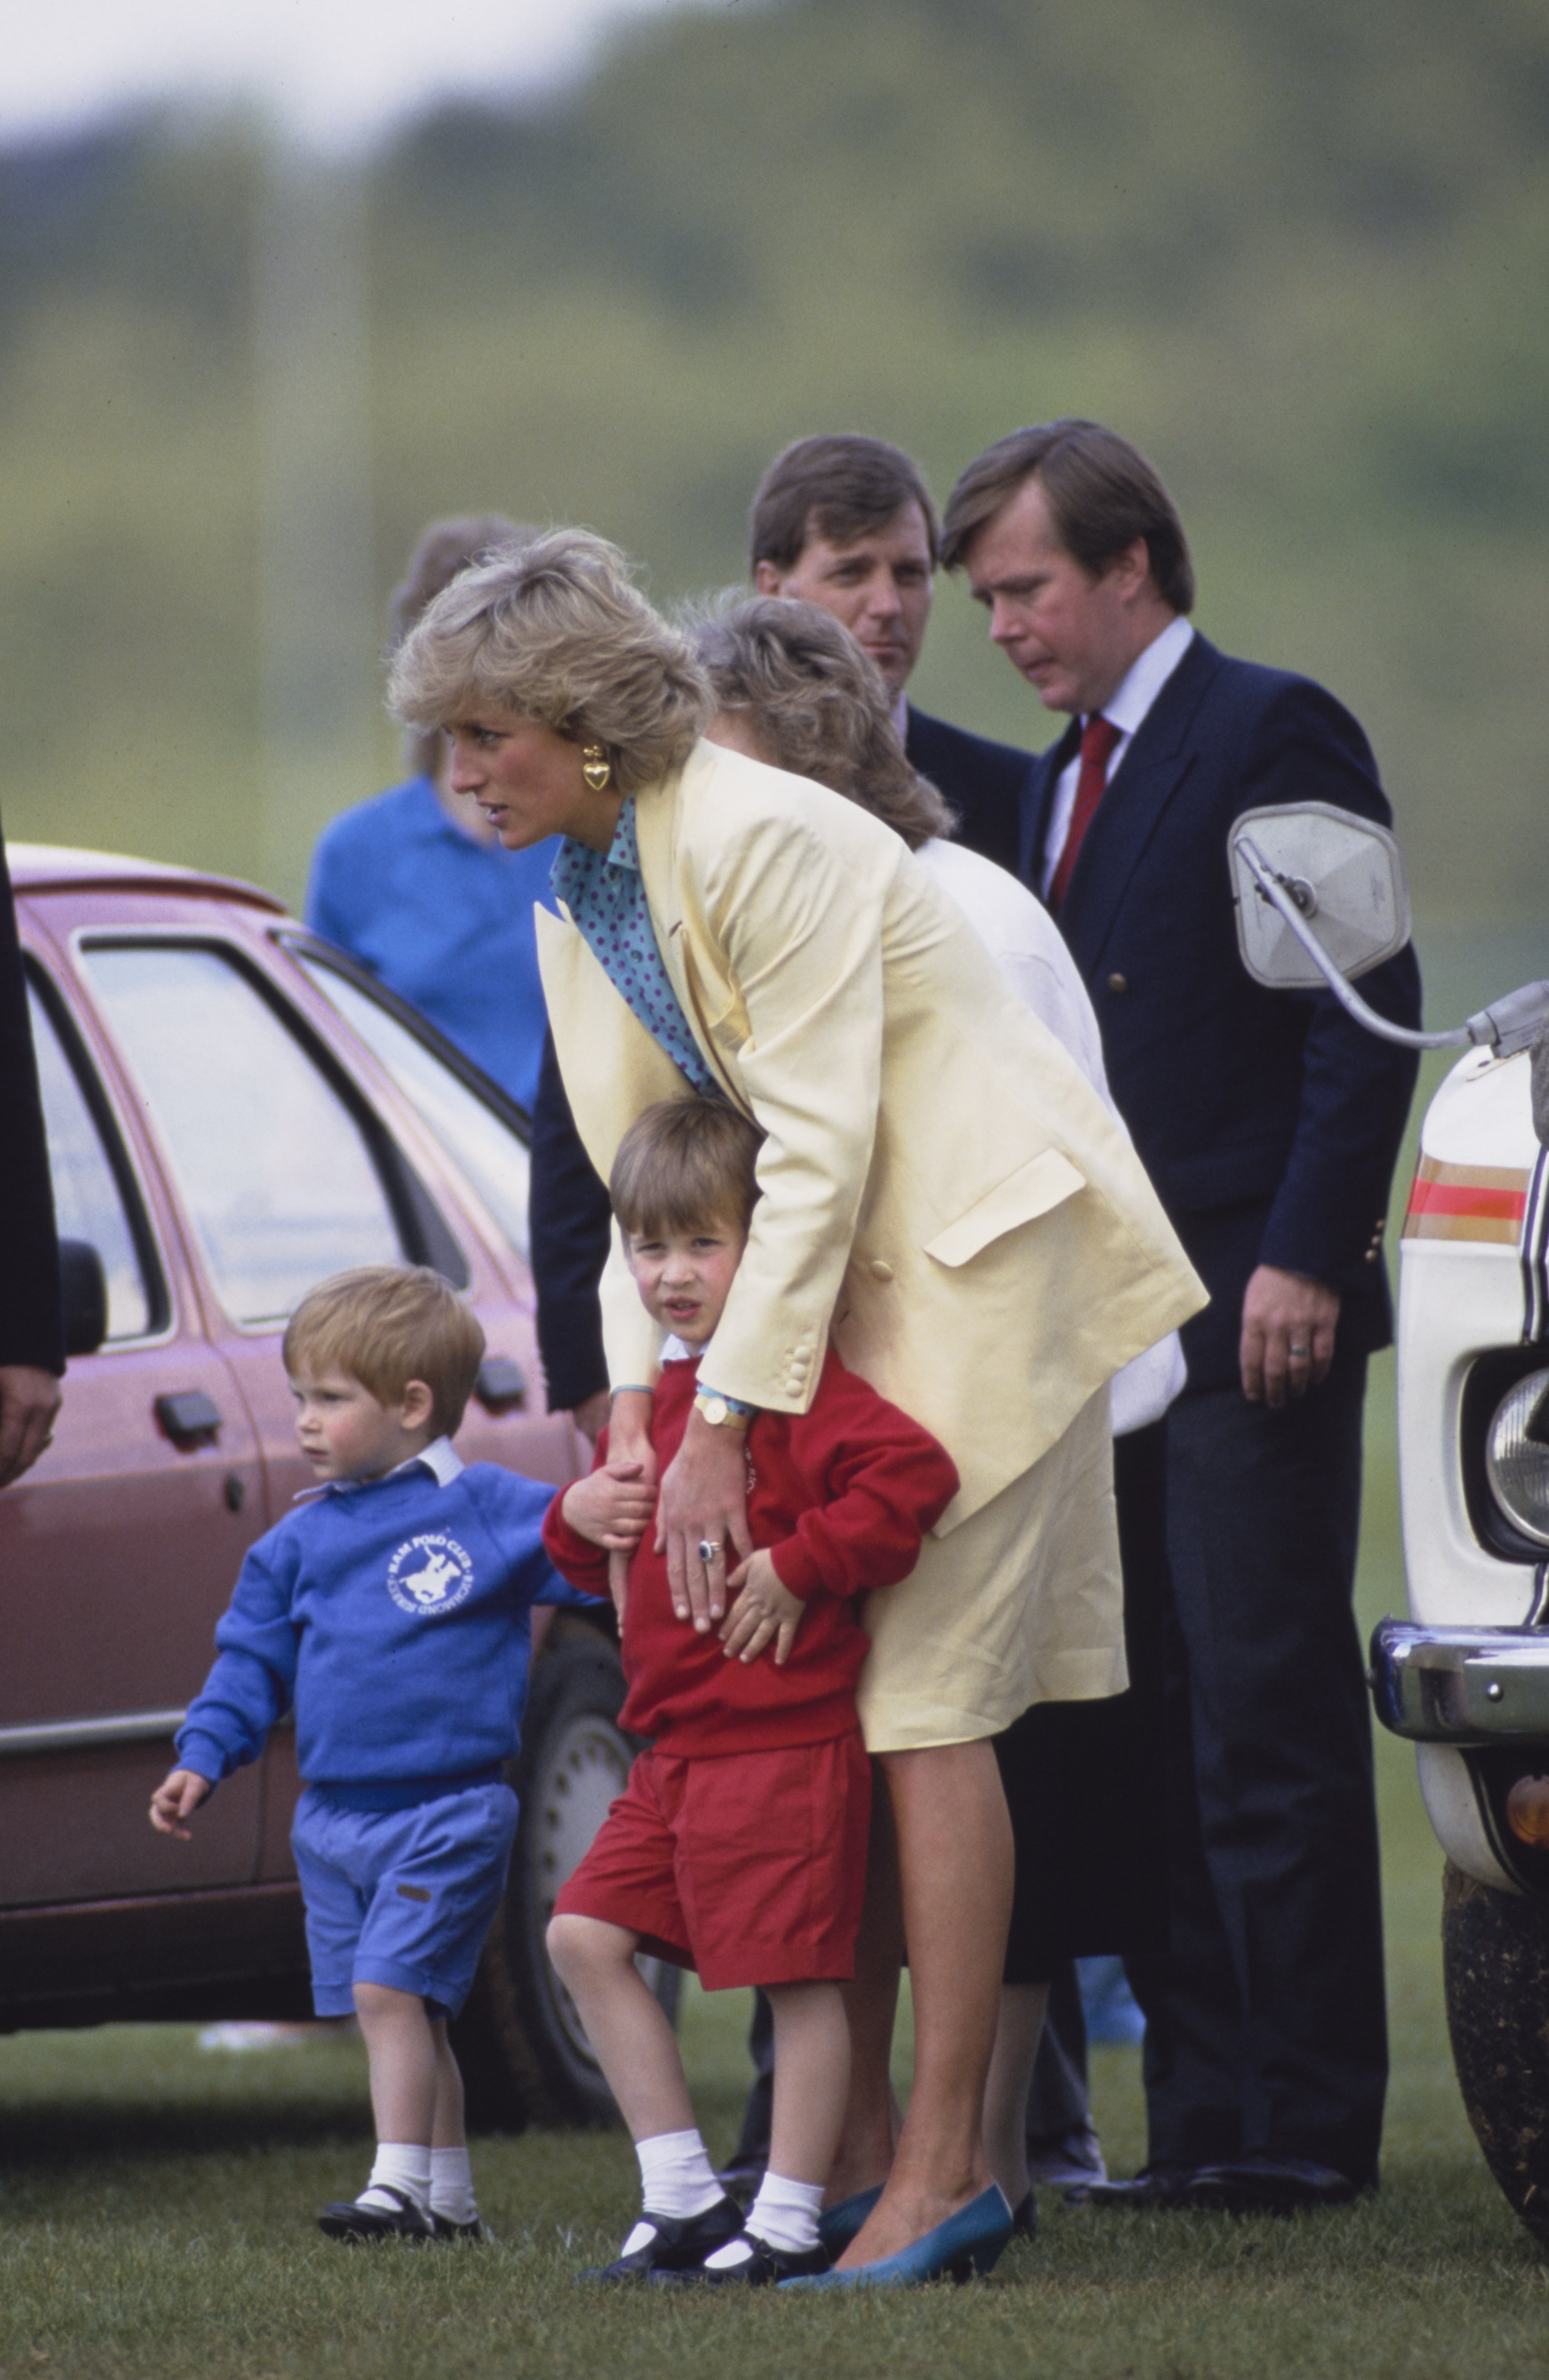 Princess Diana and her sons Prince Harry and Prince William and Diana's Royal Protection Officer Ken Wharfe in the background, on the right, at the Guards Polo Club in Windsor Great Park, Berkshire on May 31, 1987 | Source: Getty Images